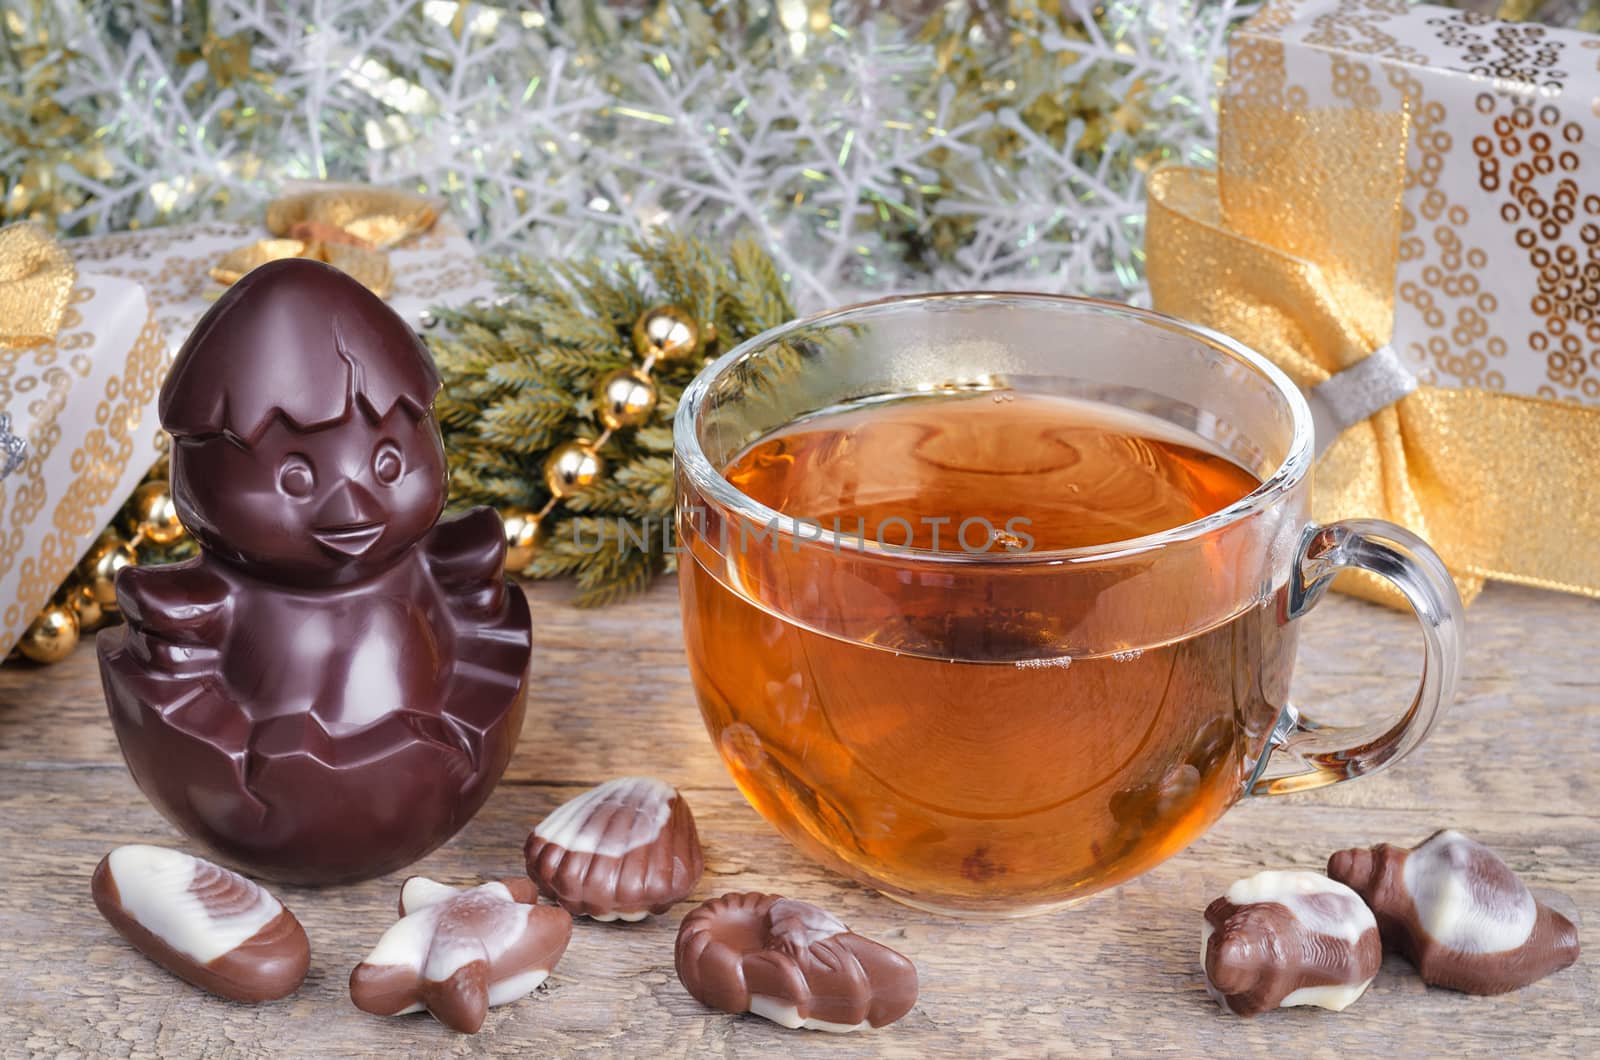 Christmas and a Cup of hot tea on old wooden background surface. Chocolate symbol of the year.